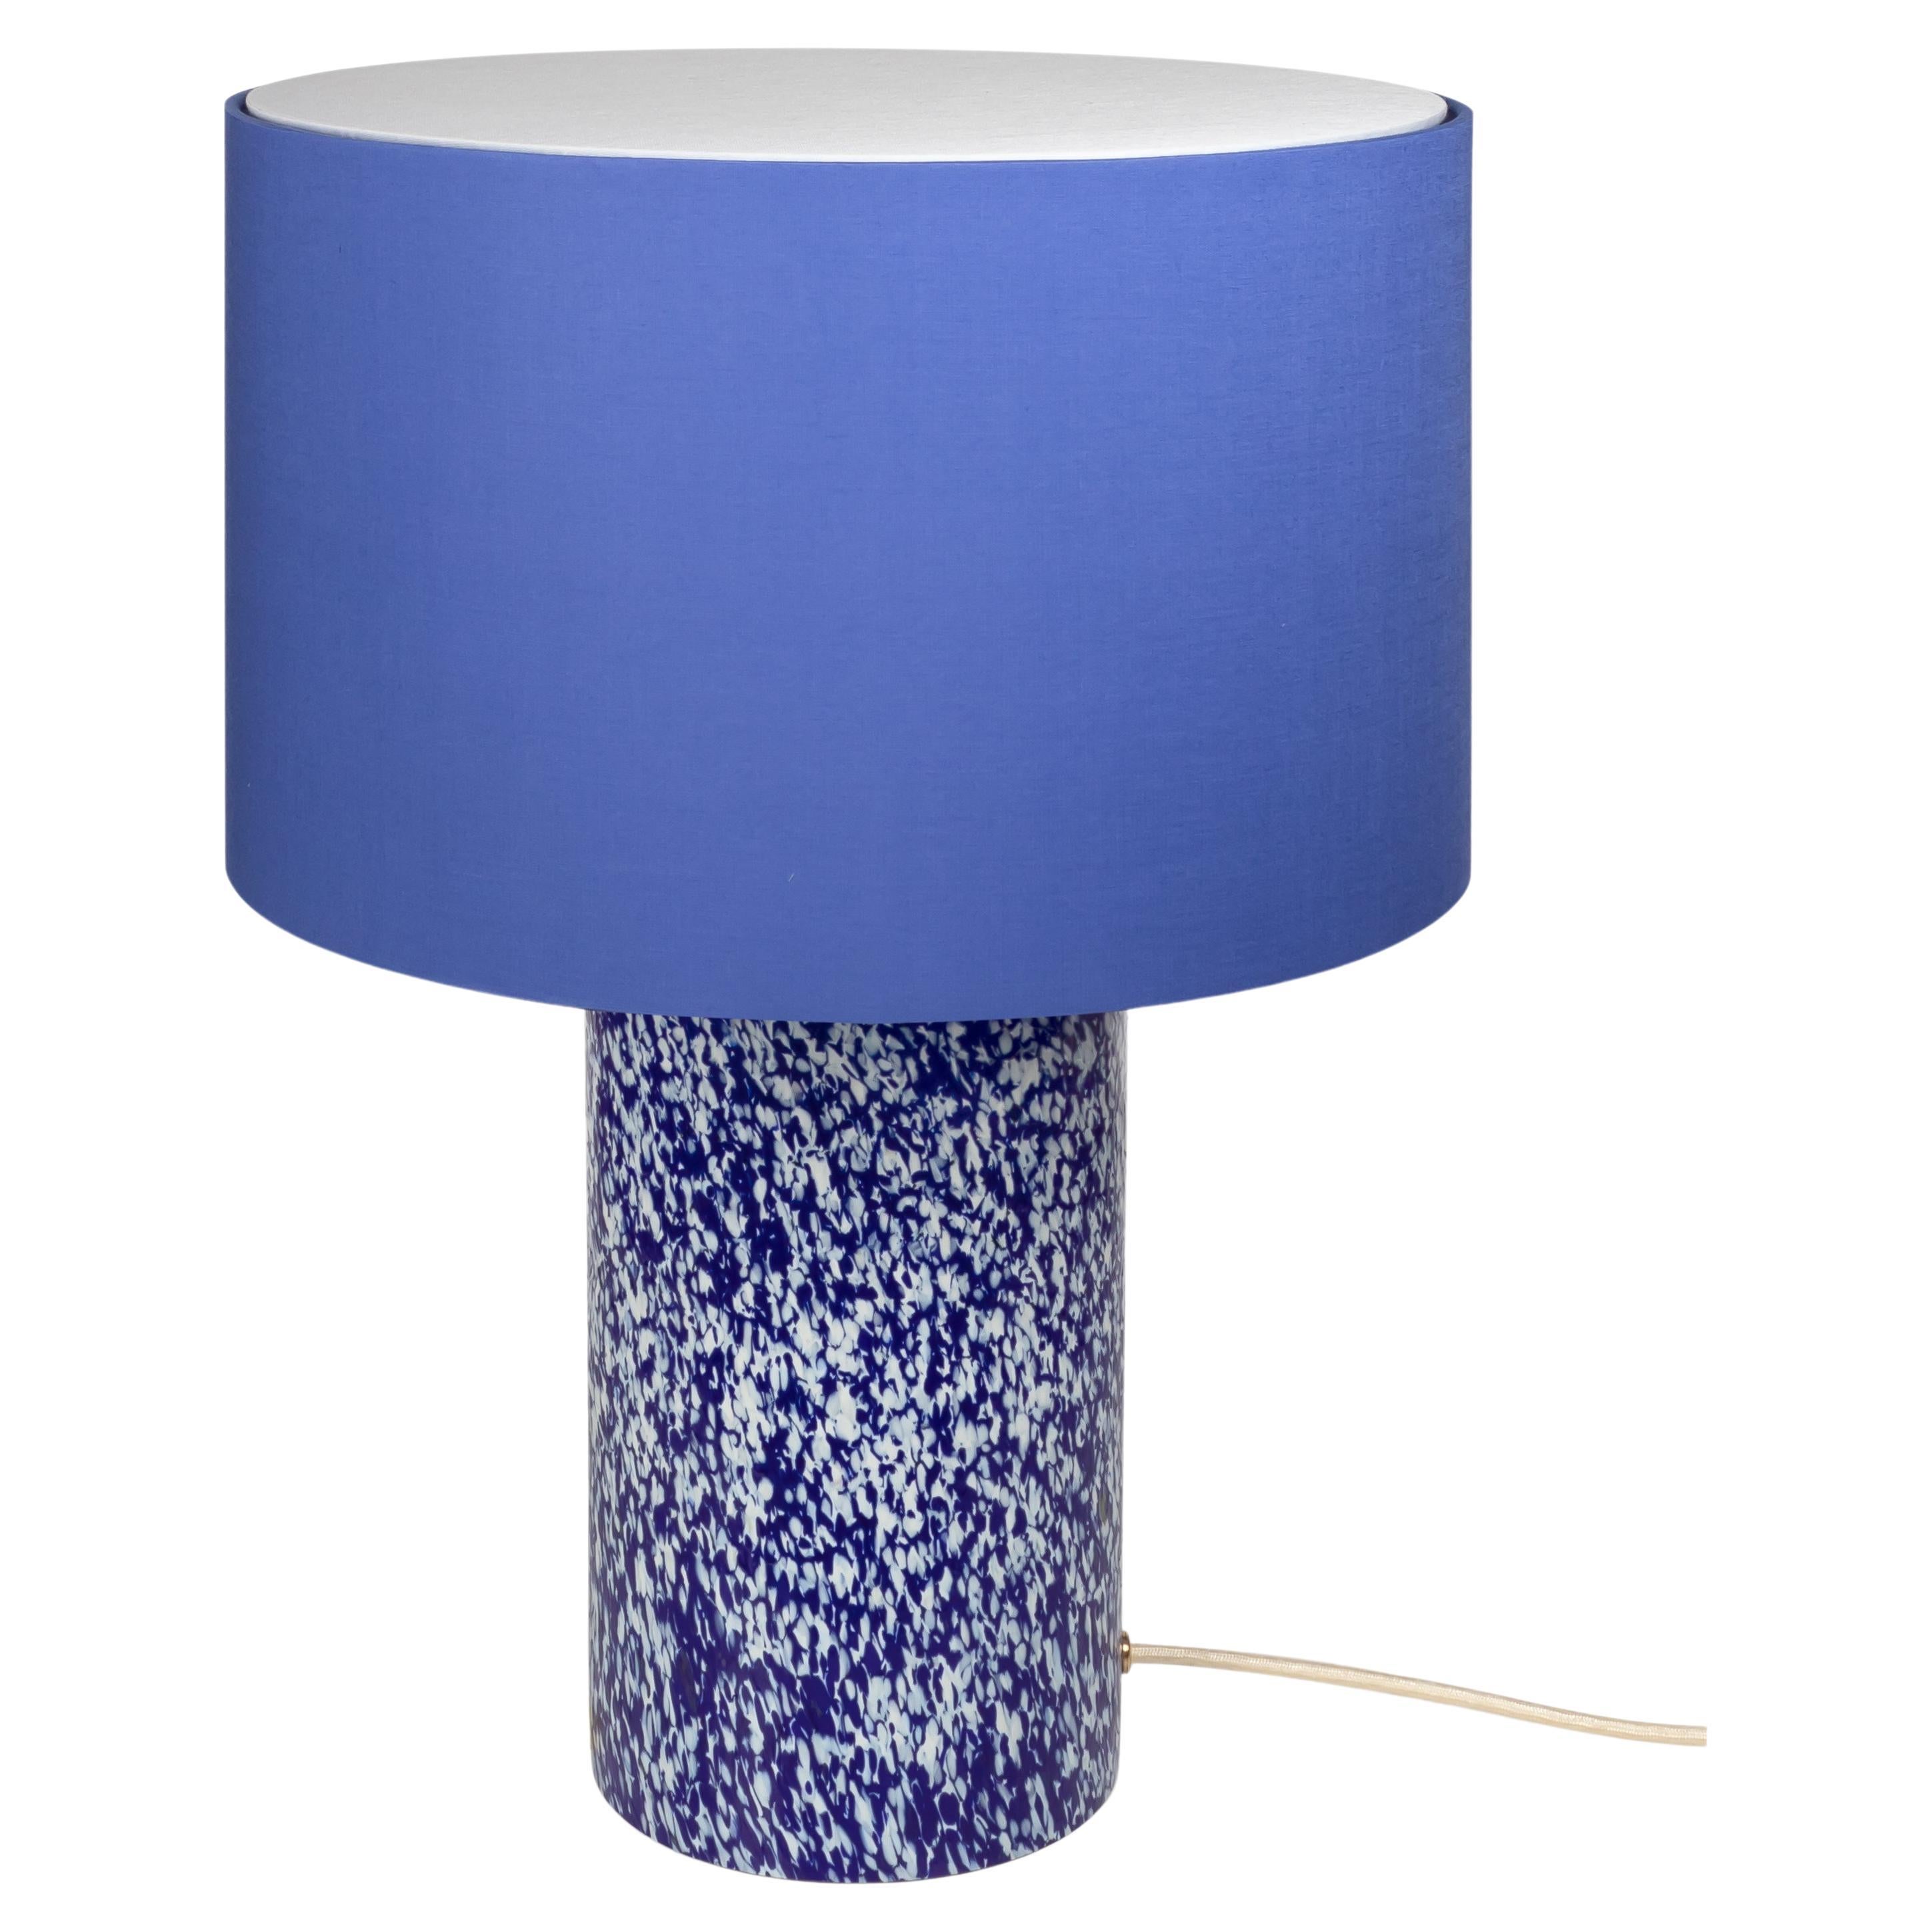 Murano Glass Blue & Ivory Pillar Lamp with Cotton Lampshade by Stories of Italy